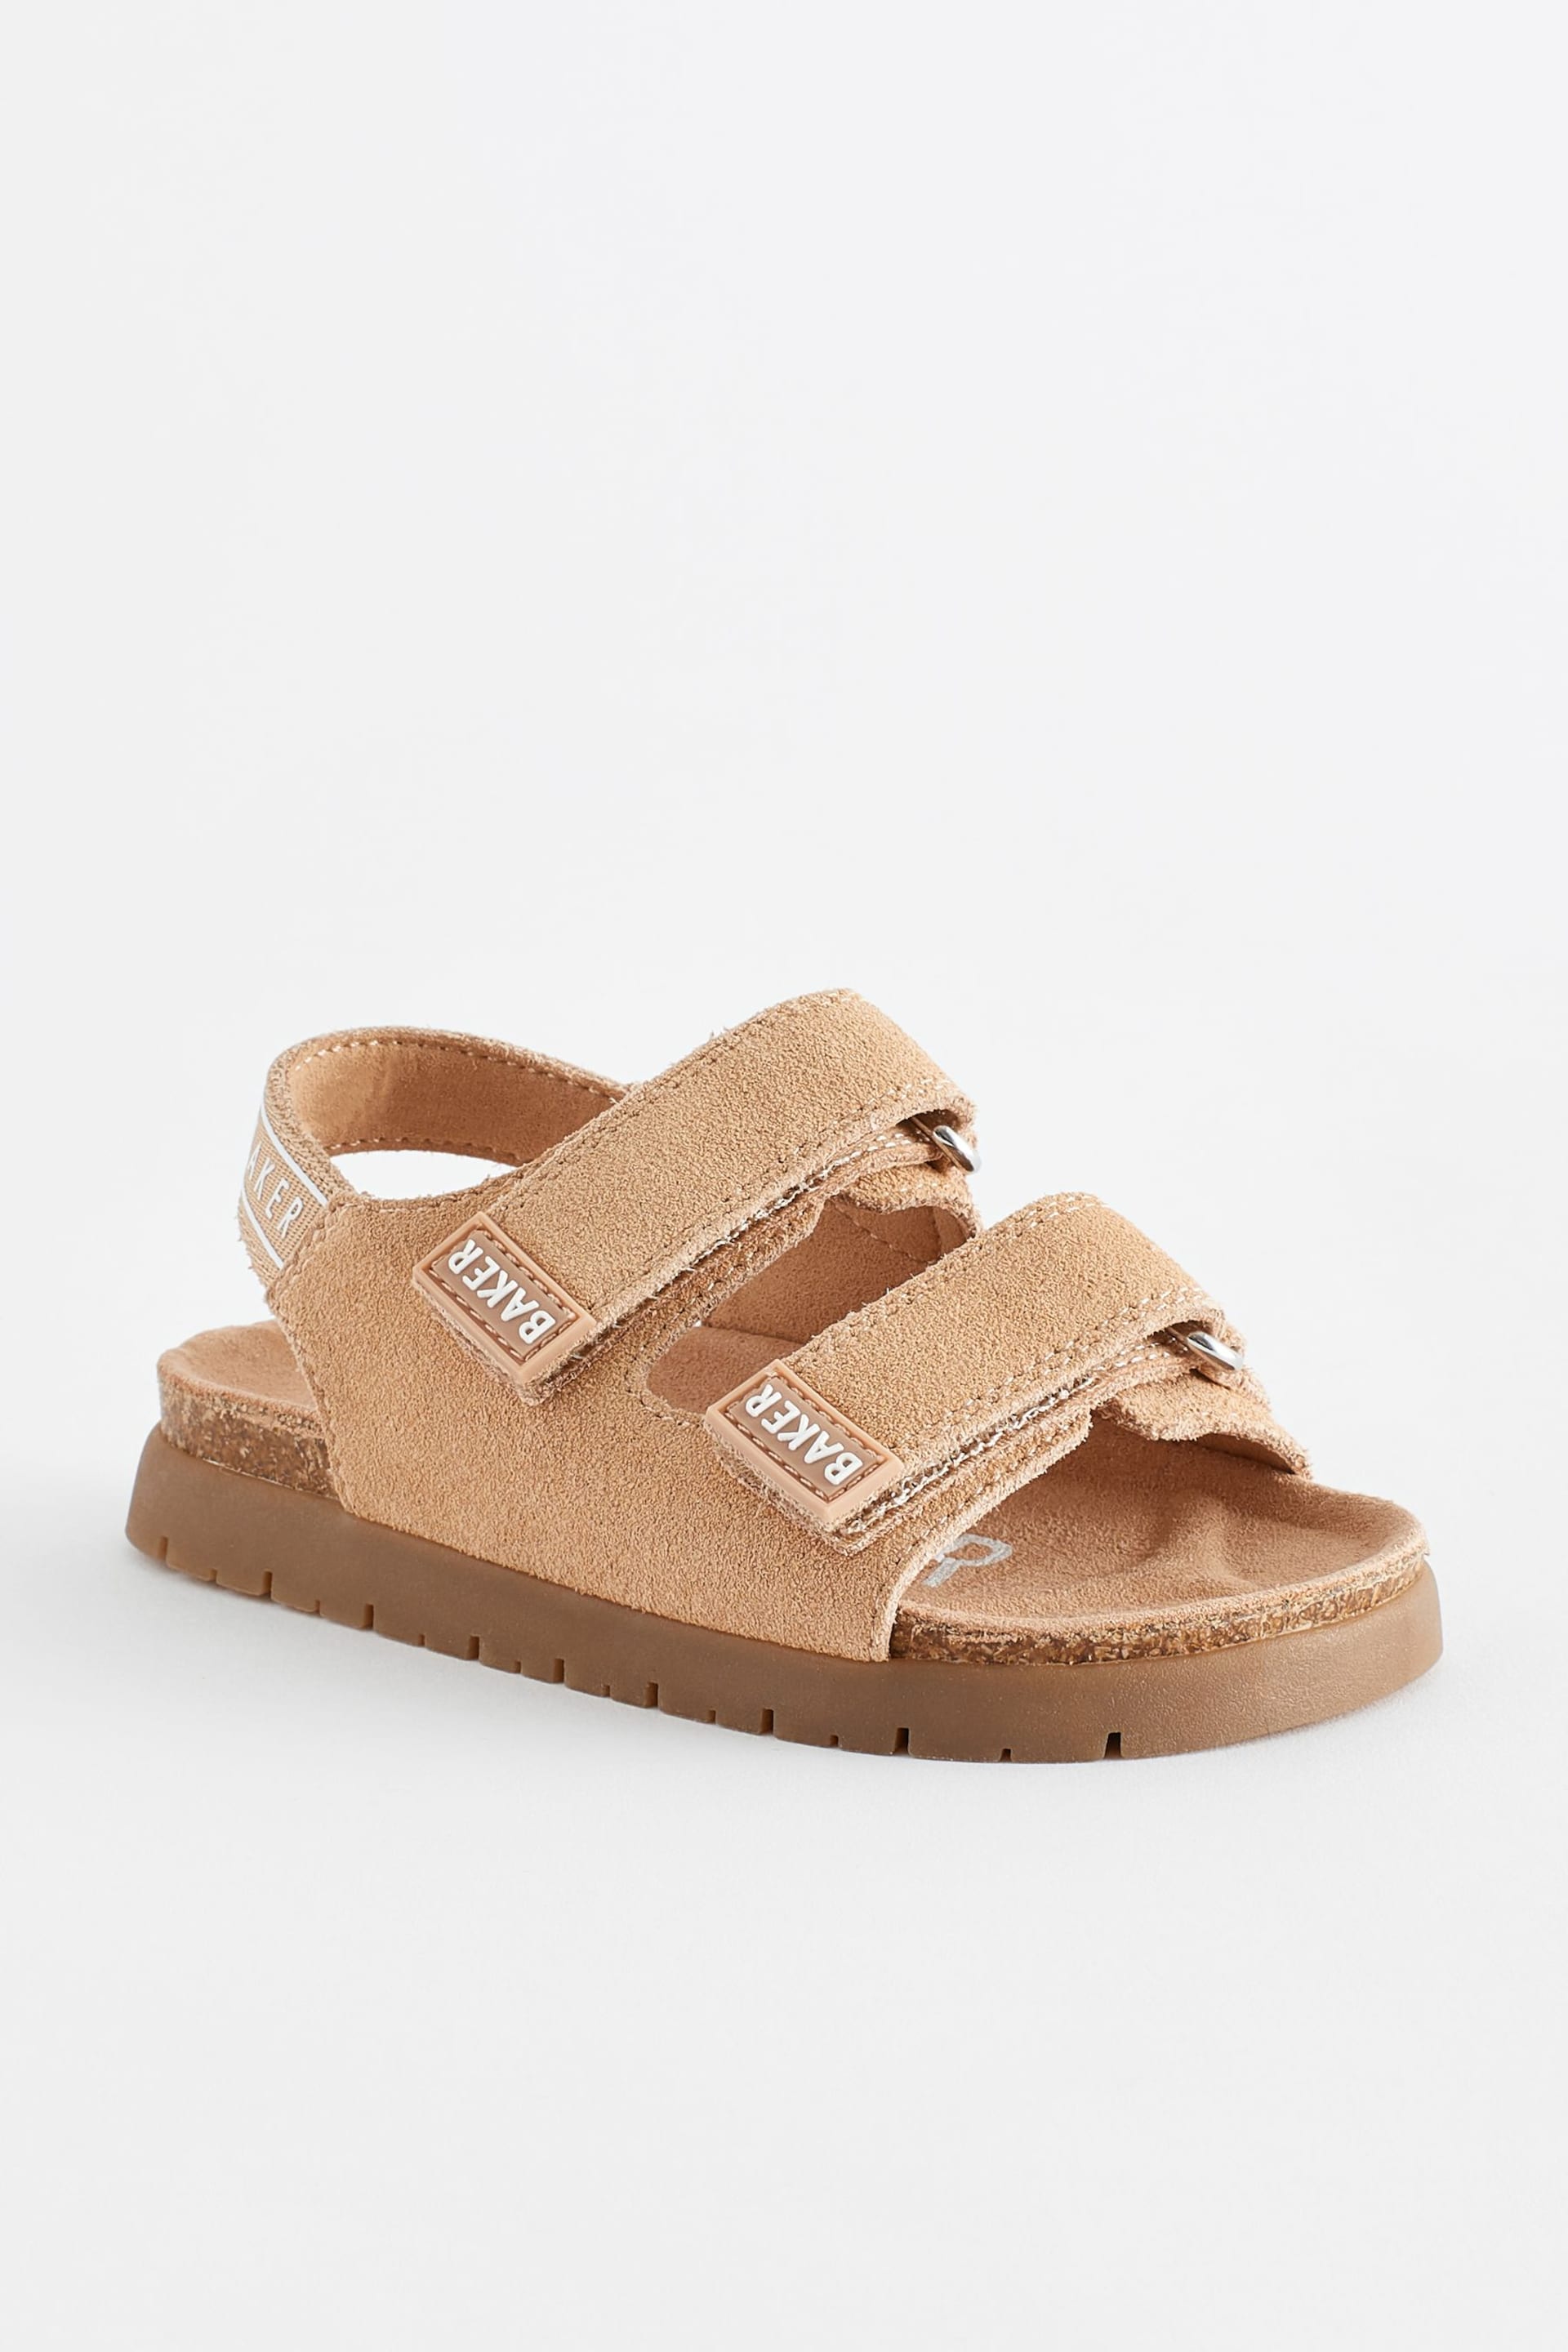 Baker by Ted Baker Boys Suede Footbed Sandals - Image 3 of 6